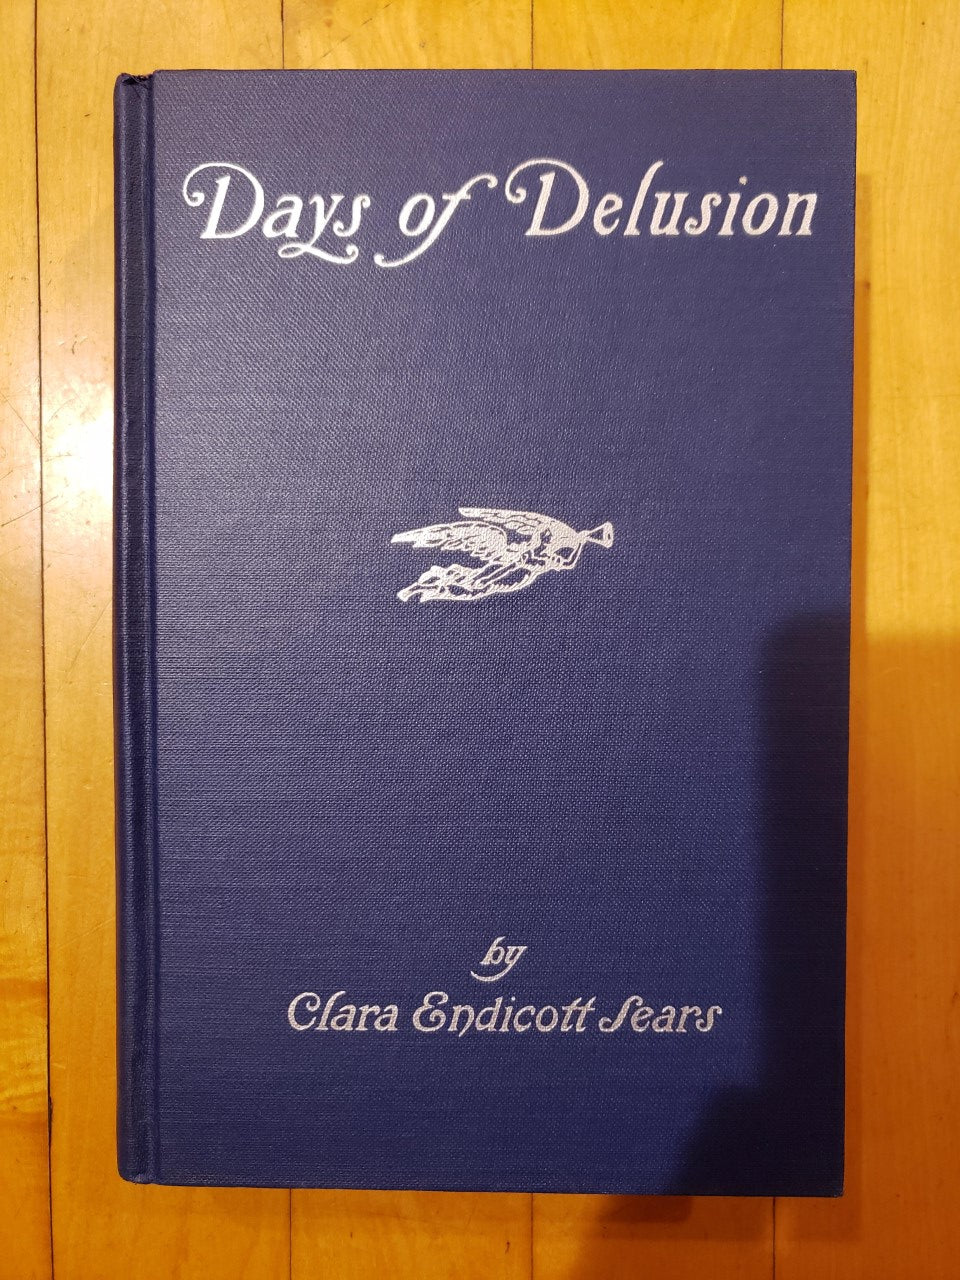 Days of Delusion by Clara Endicott Sears - printed 1924 - Rare book